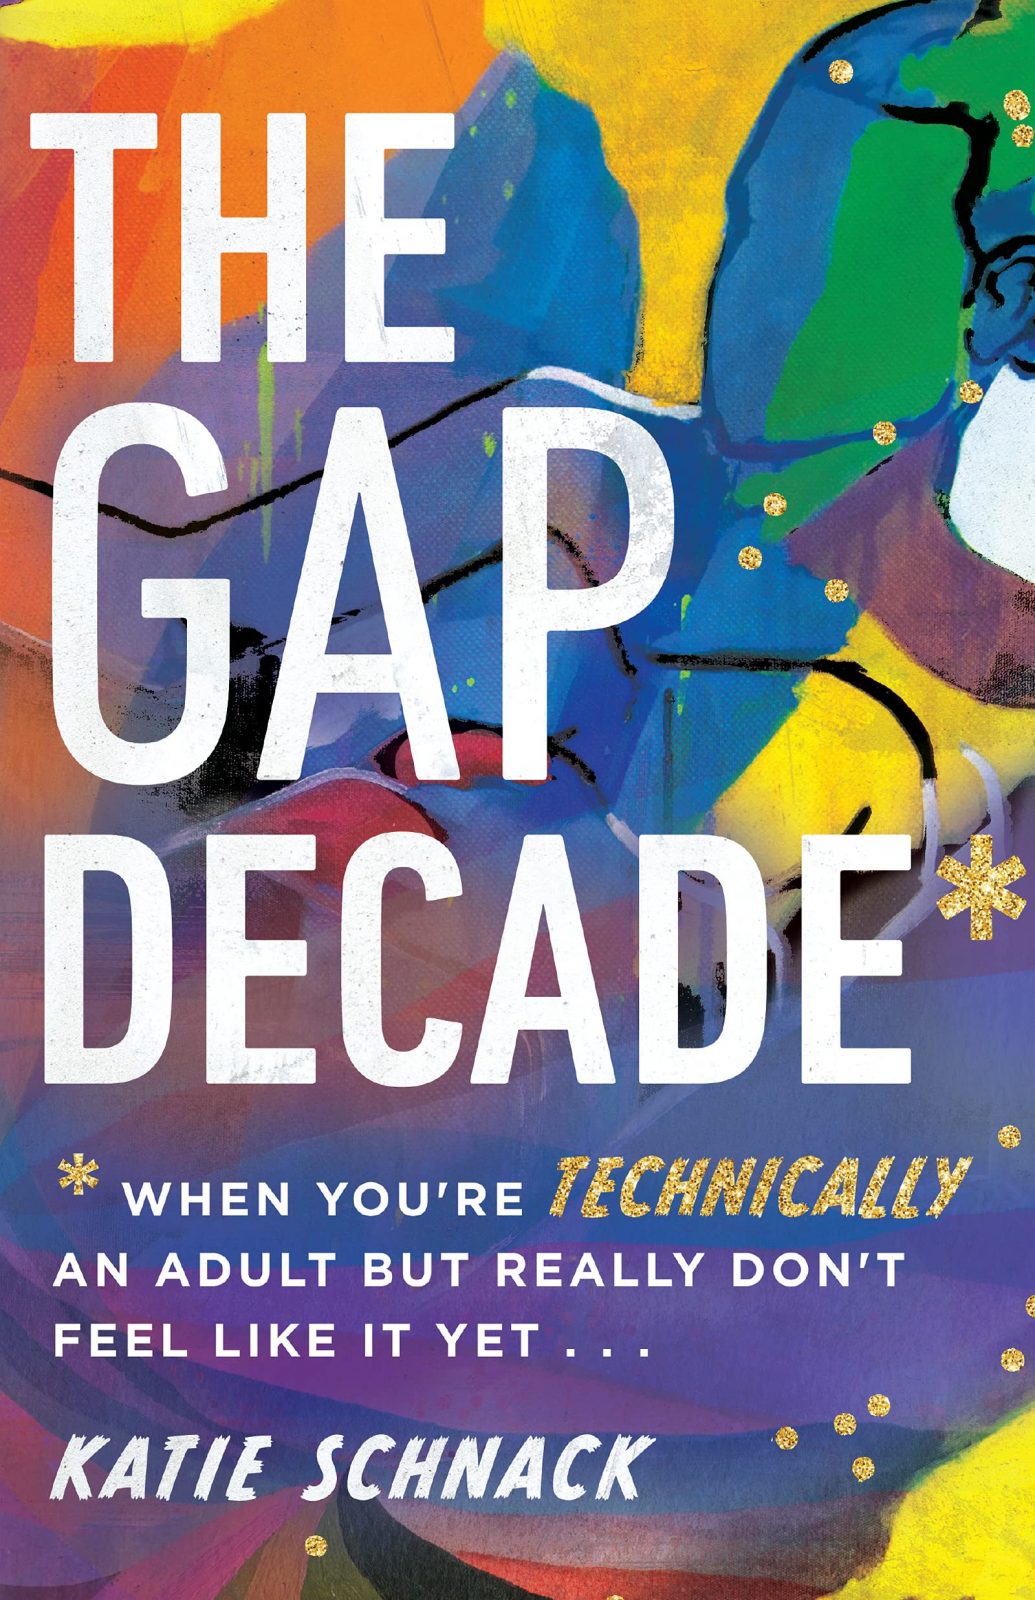 Schnack - The Gap Decade: When You're Technically an Adult but Really Don't Feel Like it Yet